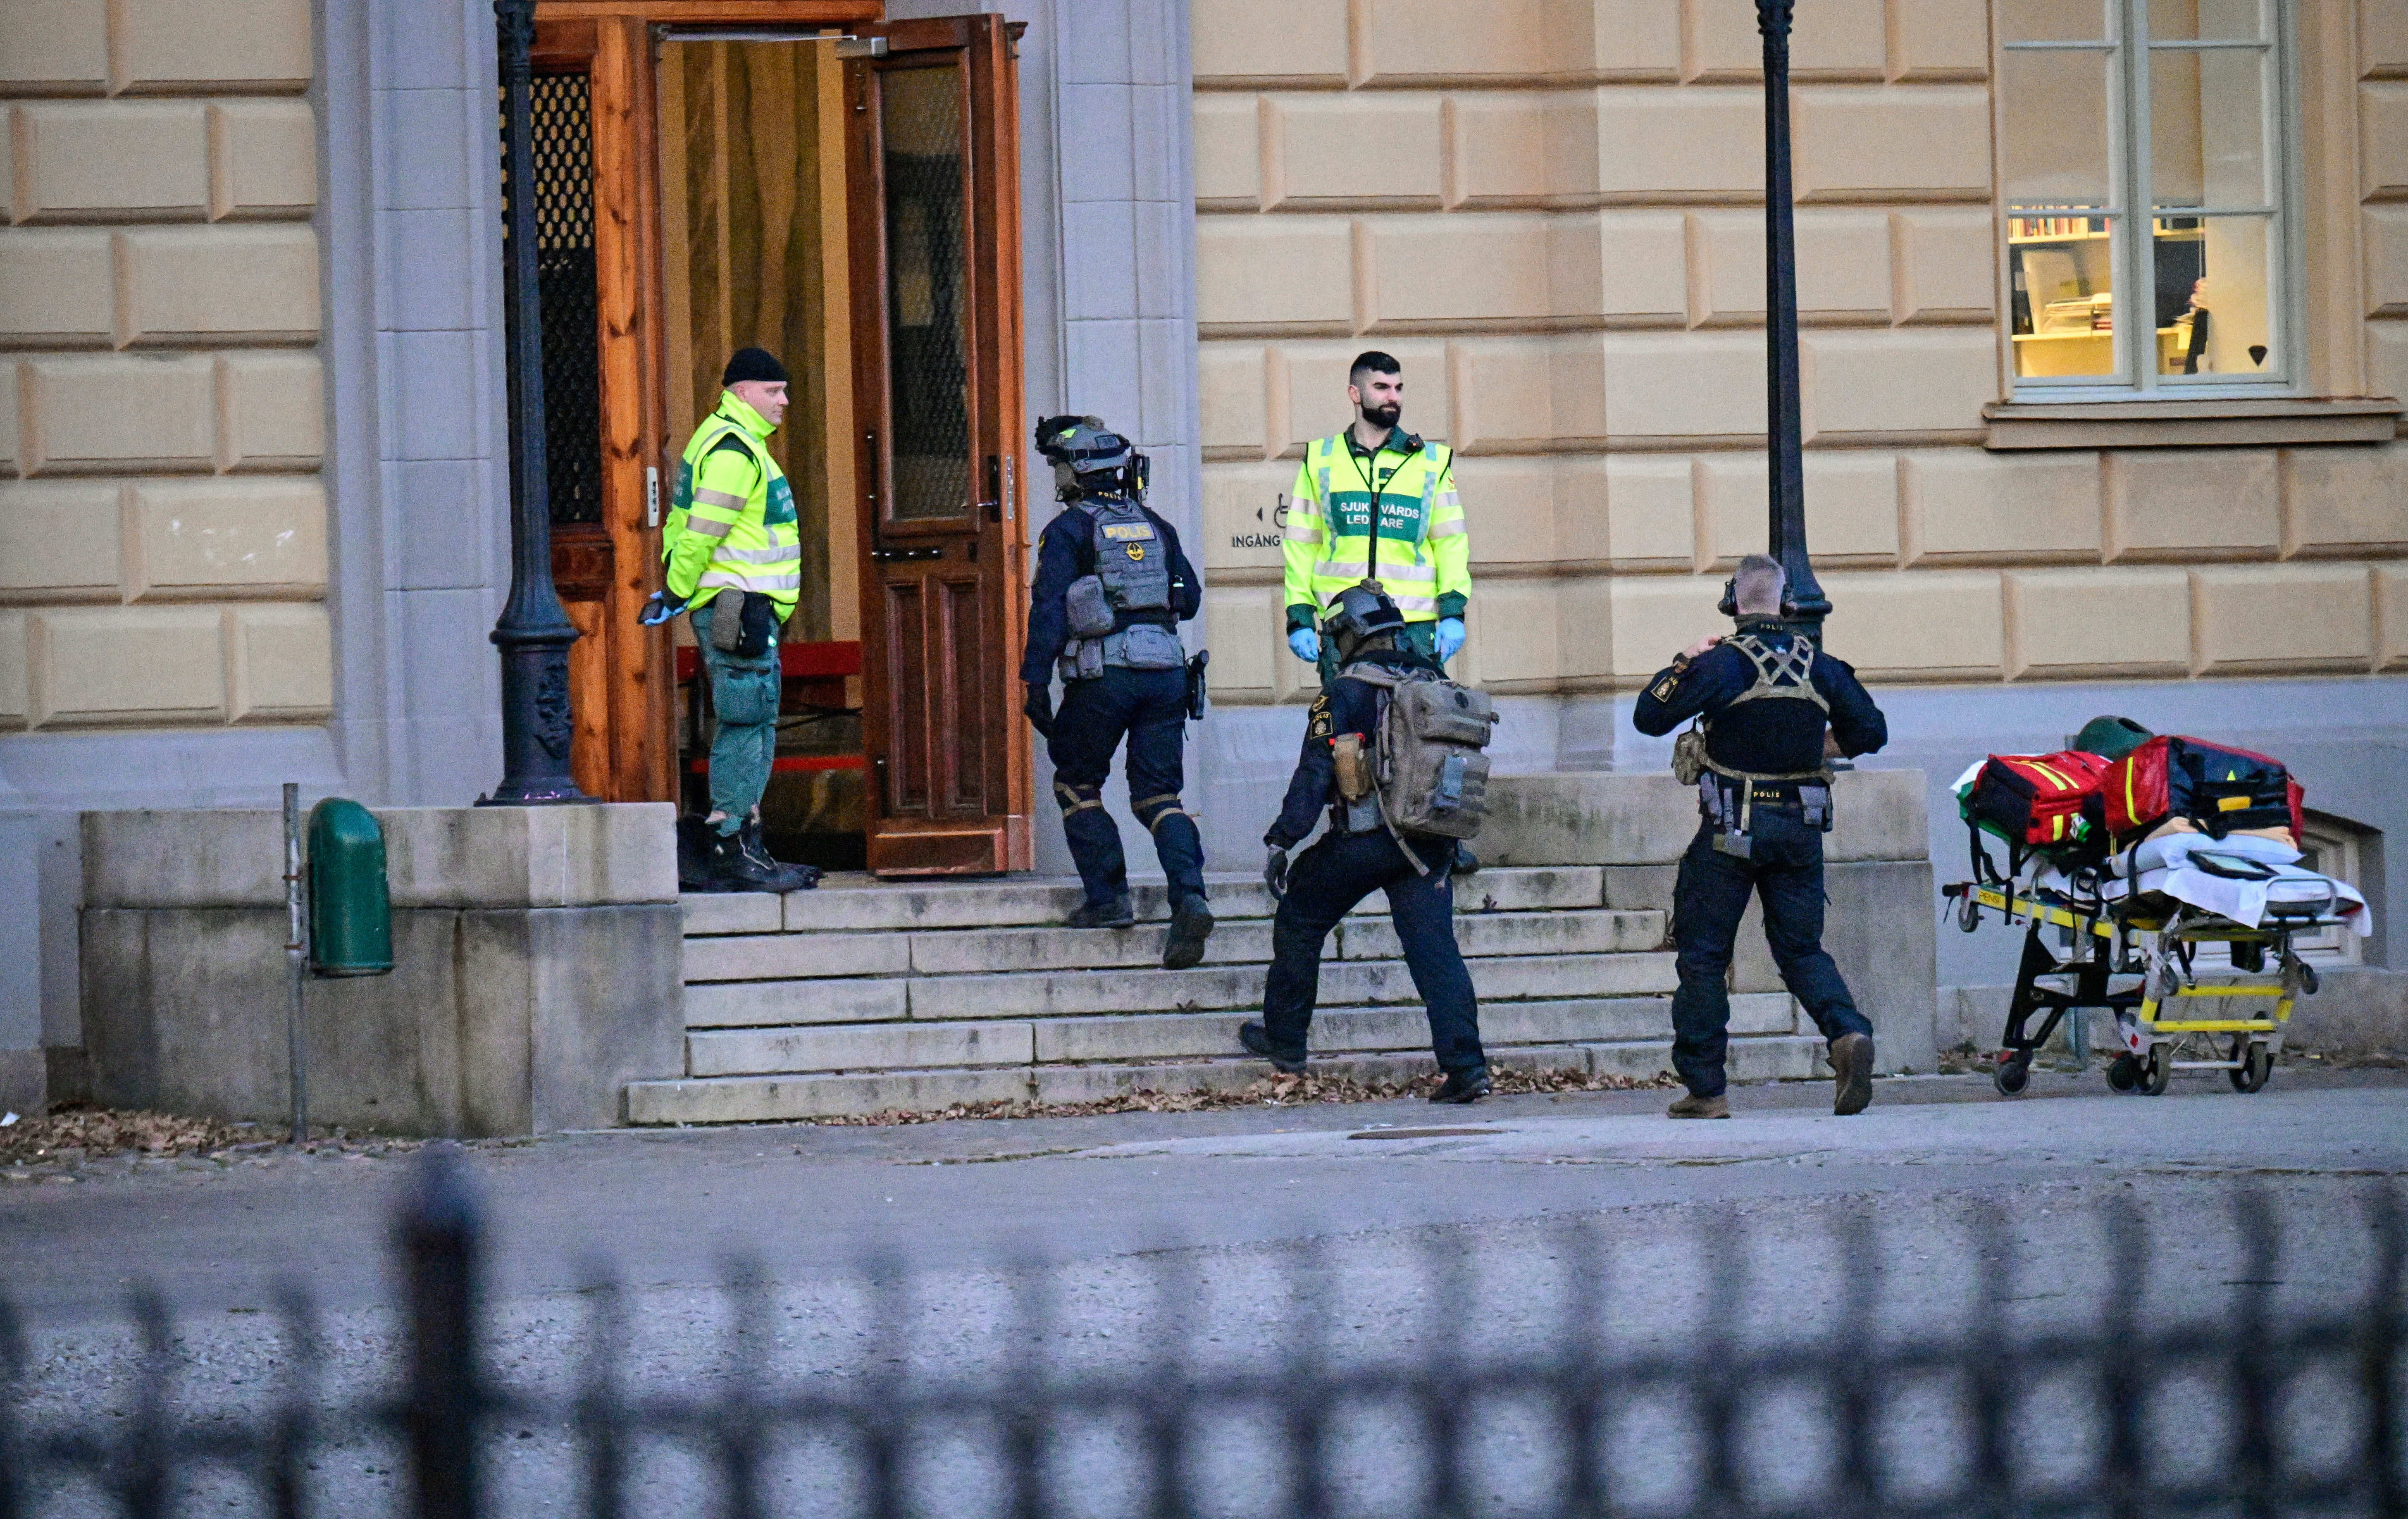 Police officers attend the scene at a school in Malmo, Sweden on 21 March